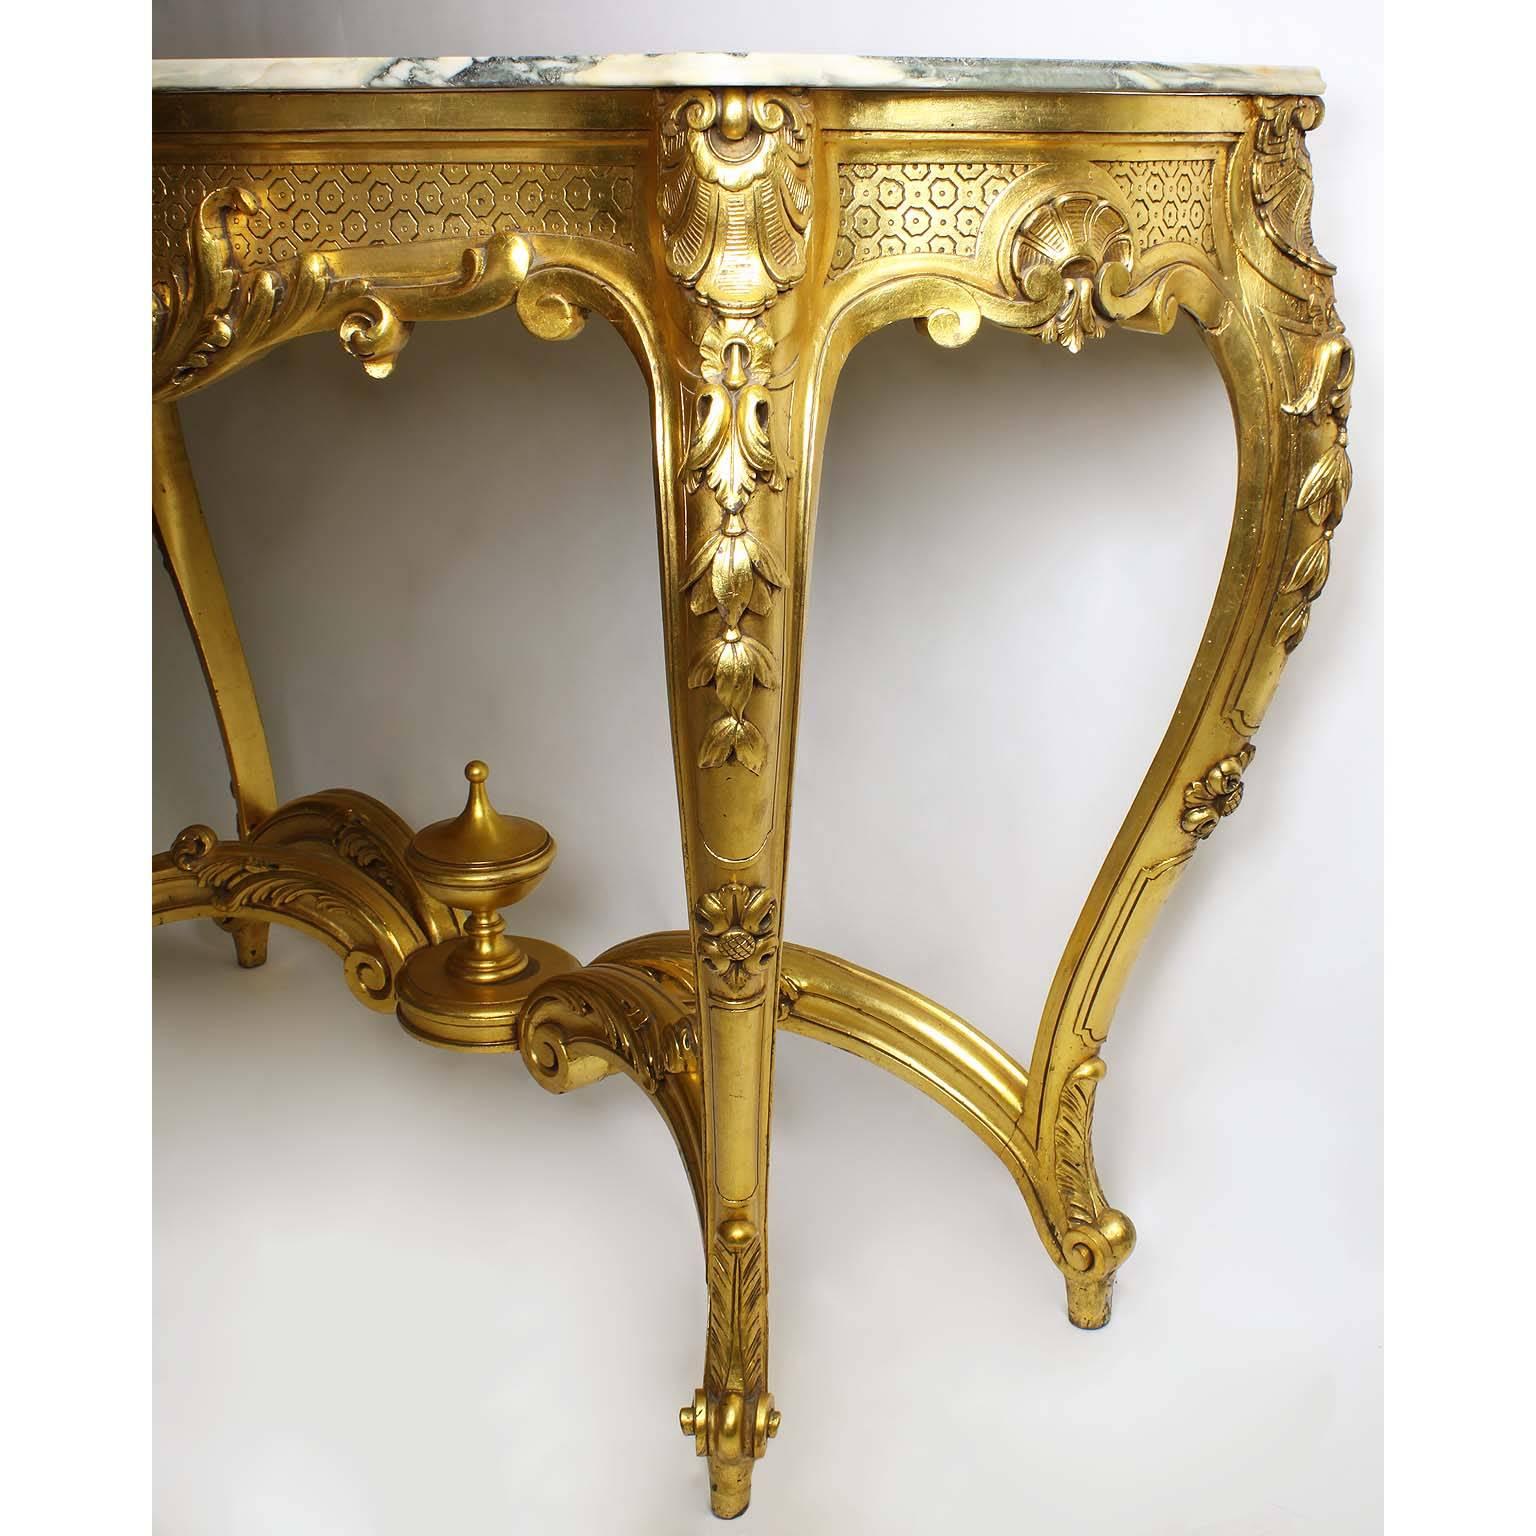 A French Louis XV style giltwood carved serpentine console table with marble top. The tall slender and freestanding giltwood carved frame centered with floral shell surmounted with acanthus and raised on four 